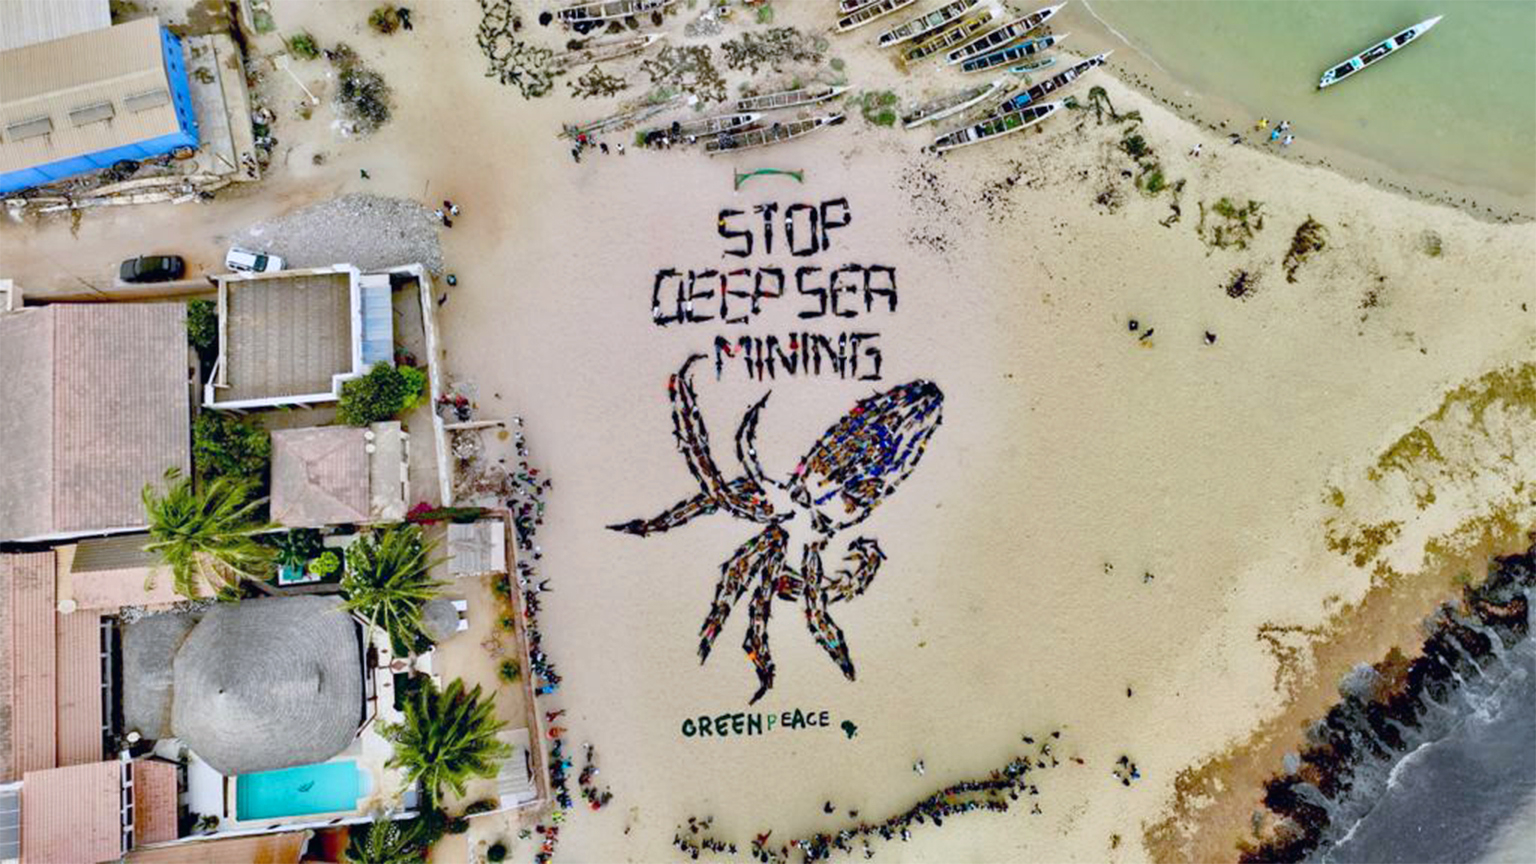 From above, people lie on a sandy beach to create a giant banner saying 'Stop deep sea mining' and make the shape of an octopus.